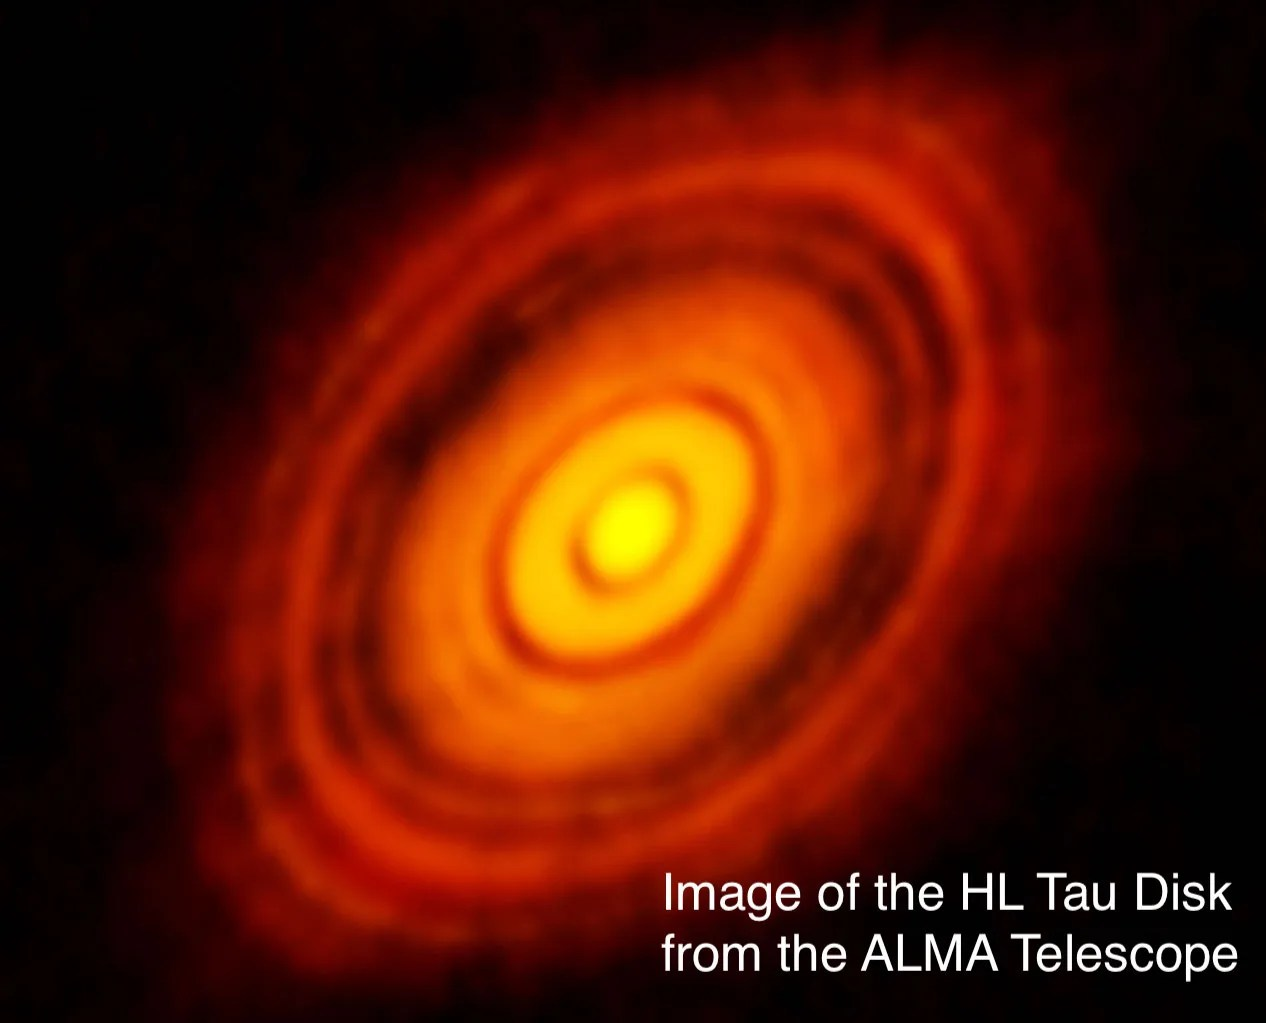 Concentric rings surround a bright yellow circle in the center. The rings are yellow-orange in the middle, orange-red in the middle, and red and ragged on the outer ring. Text in the lower right corner of the image reads “Image of the HL Tau Disk from the ALMA Telescope” where ALMA stands for “Atacama Large Millimeter Array.”